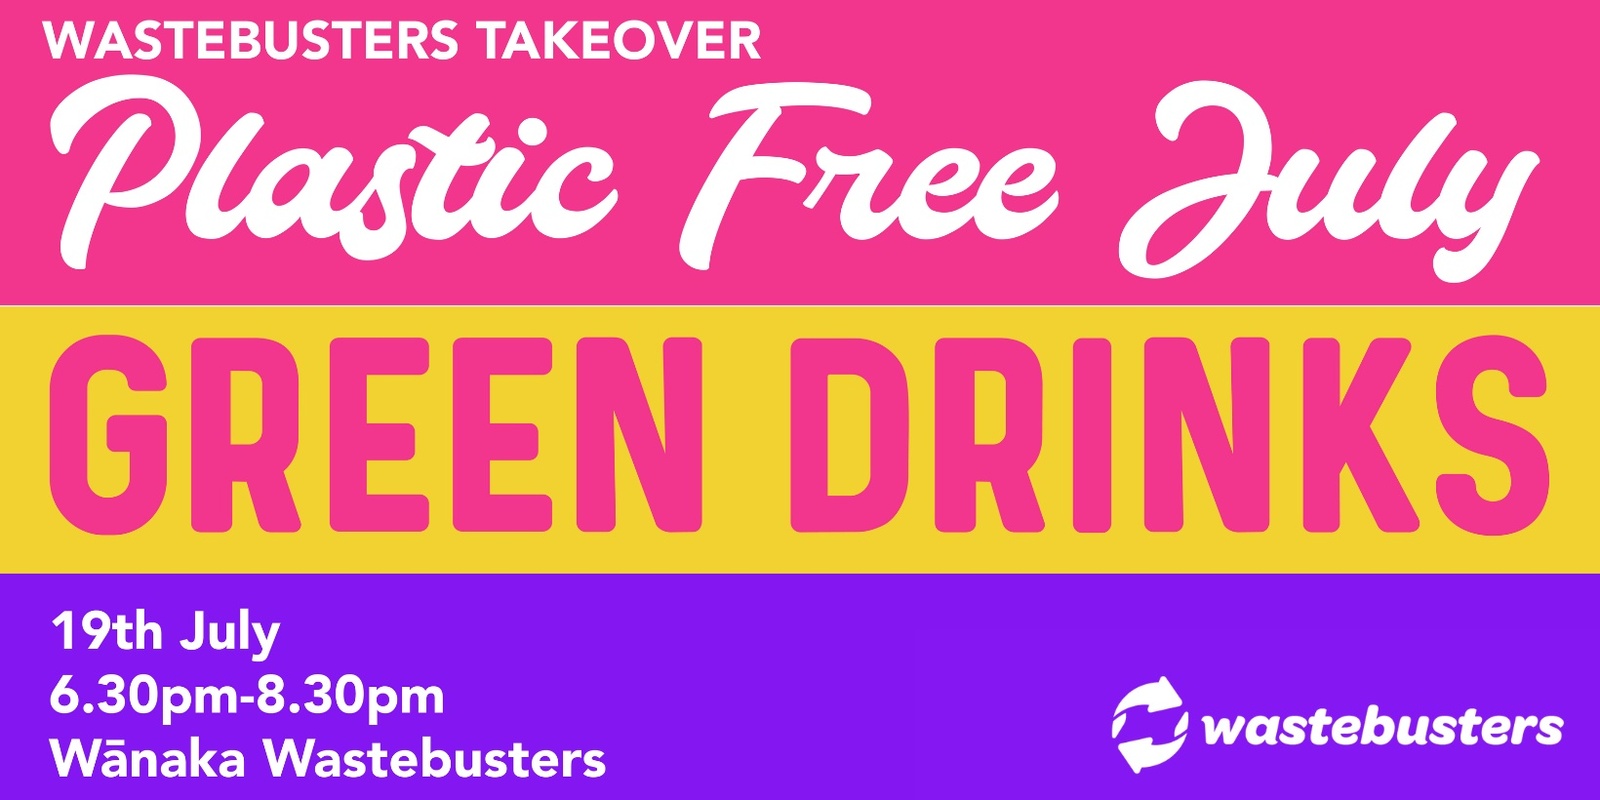 Banner image for Plastic Free July Green Drinks - Wastebusters Takeover